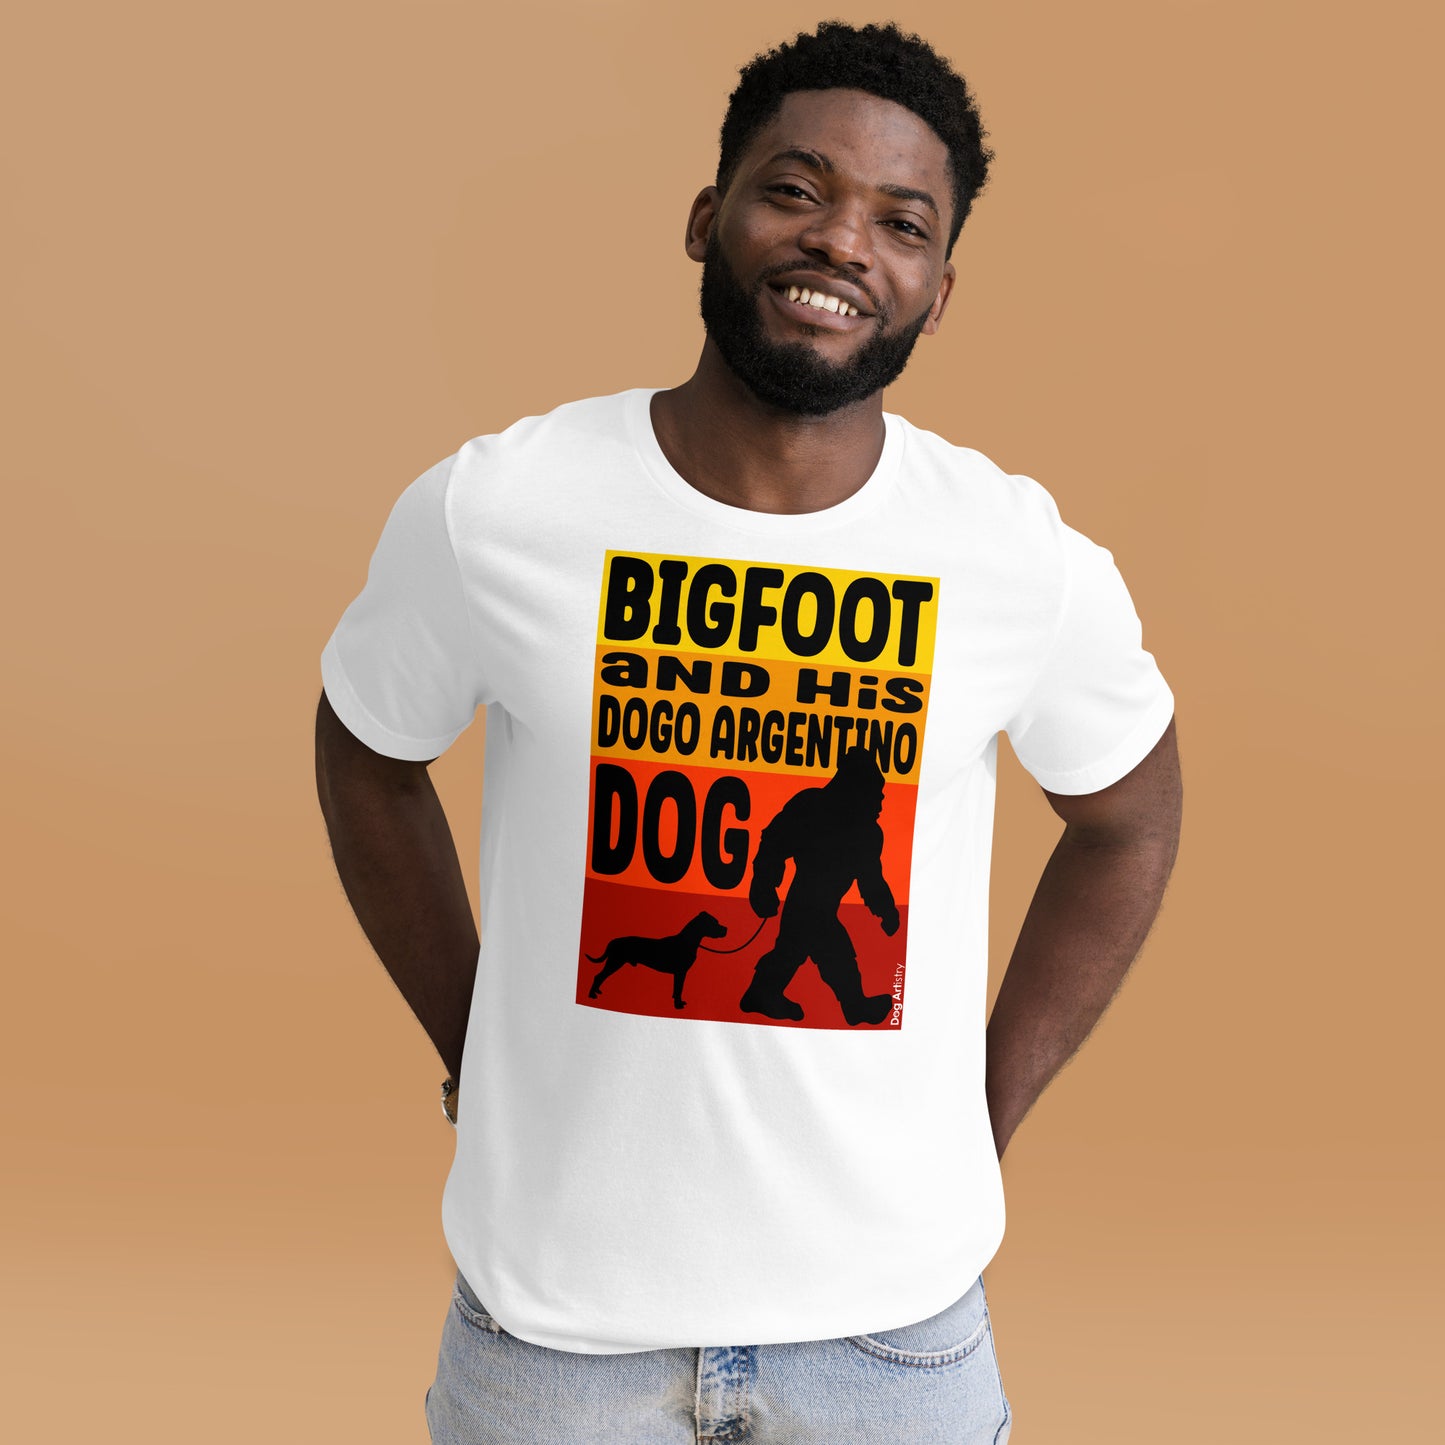 Bigfoot and his Dogo Argentino dog unisex white t-shirt by Dog Artistry.